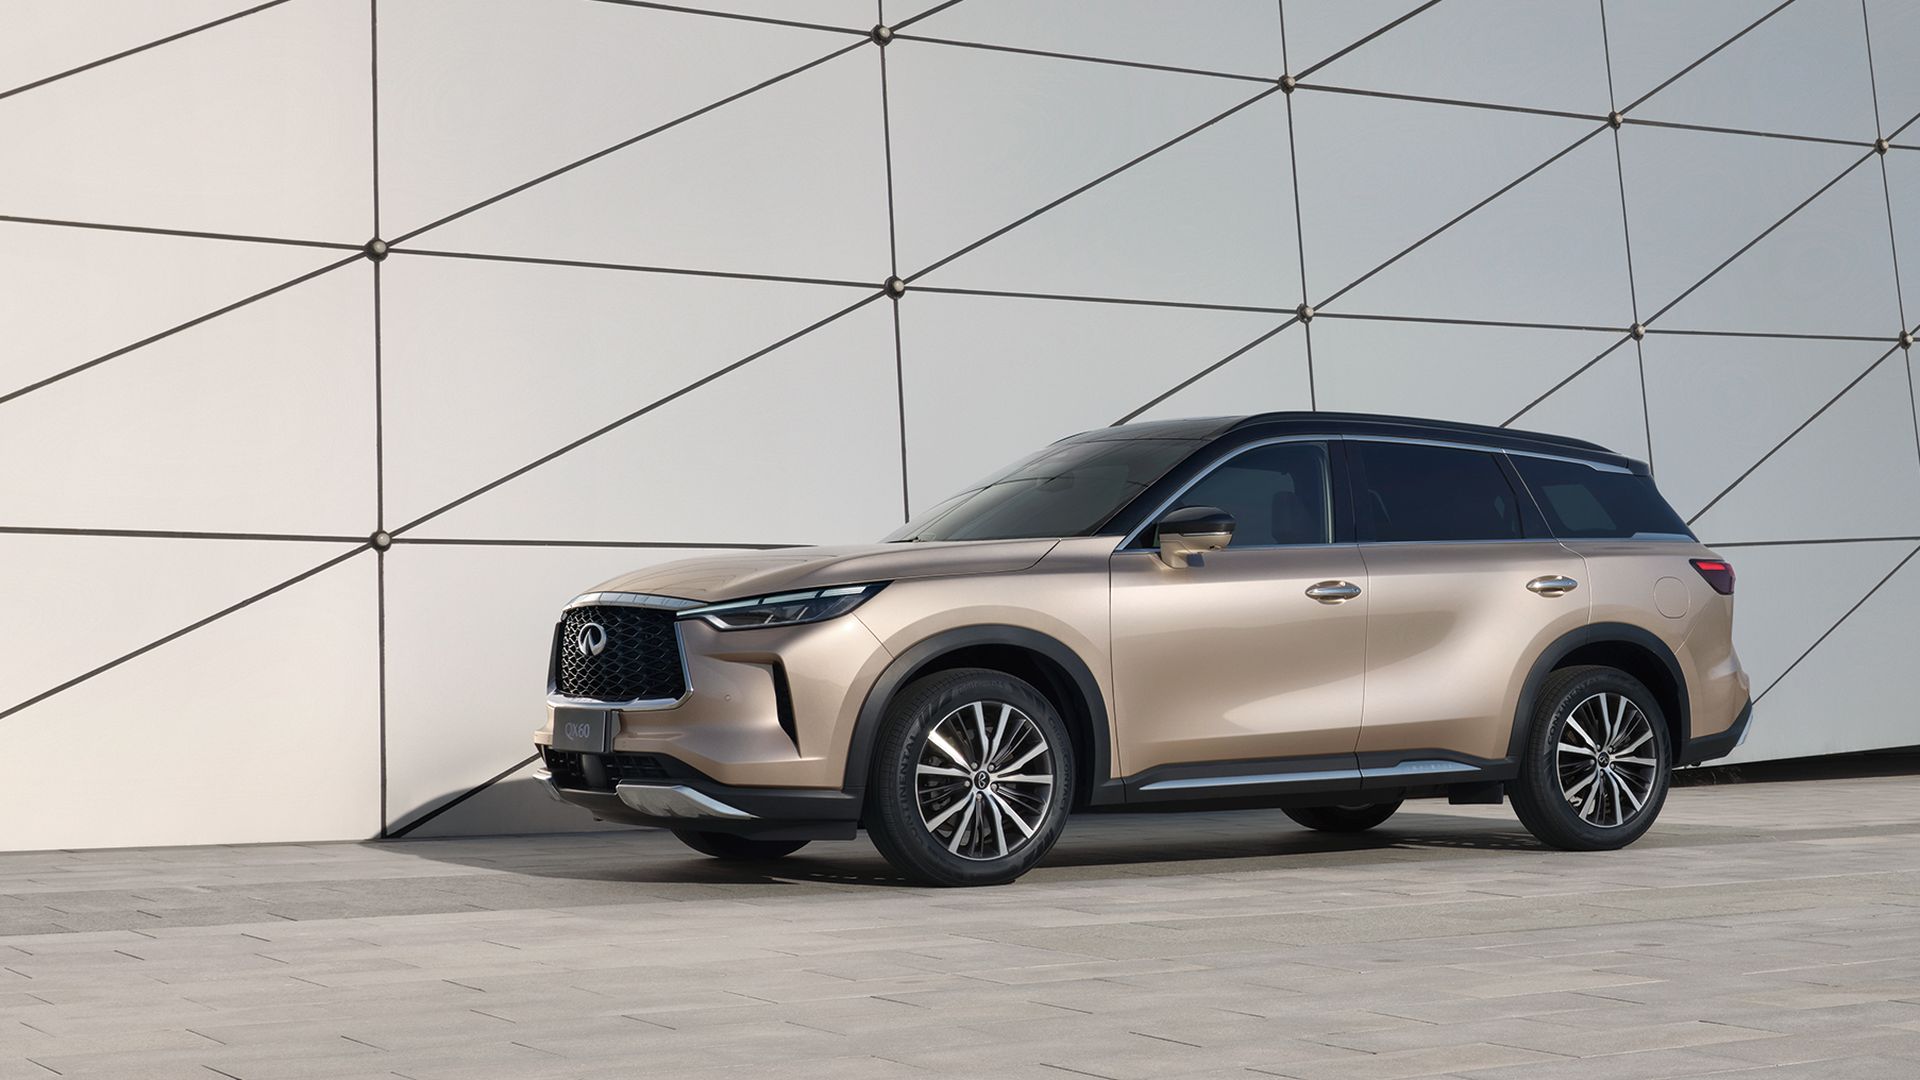 2022 INFINITI QX60 Crossover exterior design with woman